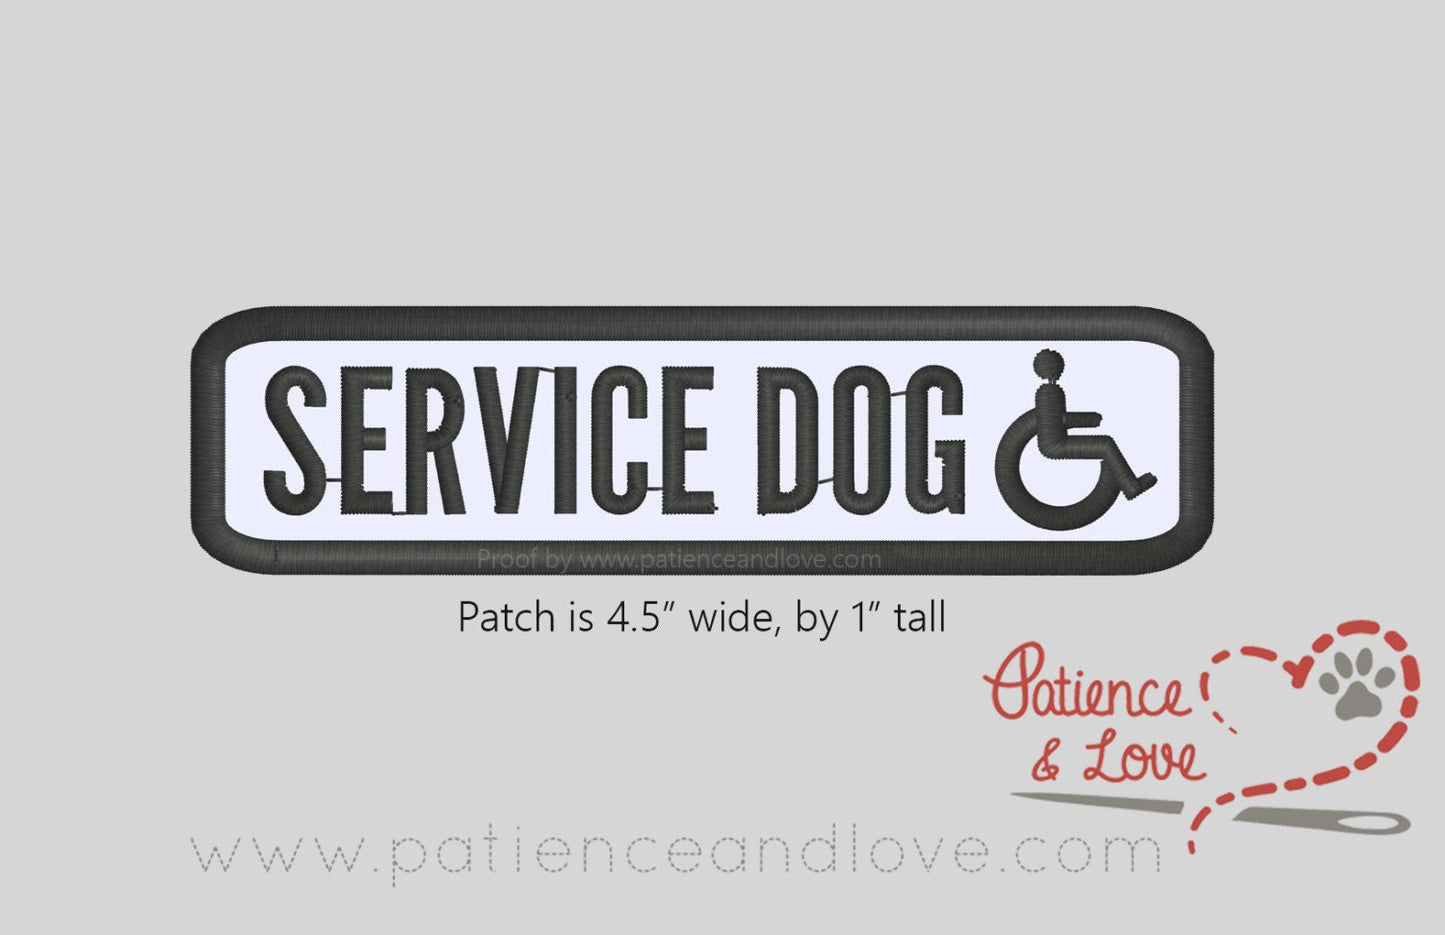 Service dog with wheelchair symbol, 4.5 x 1 inch patch